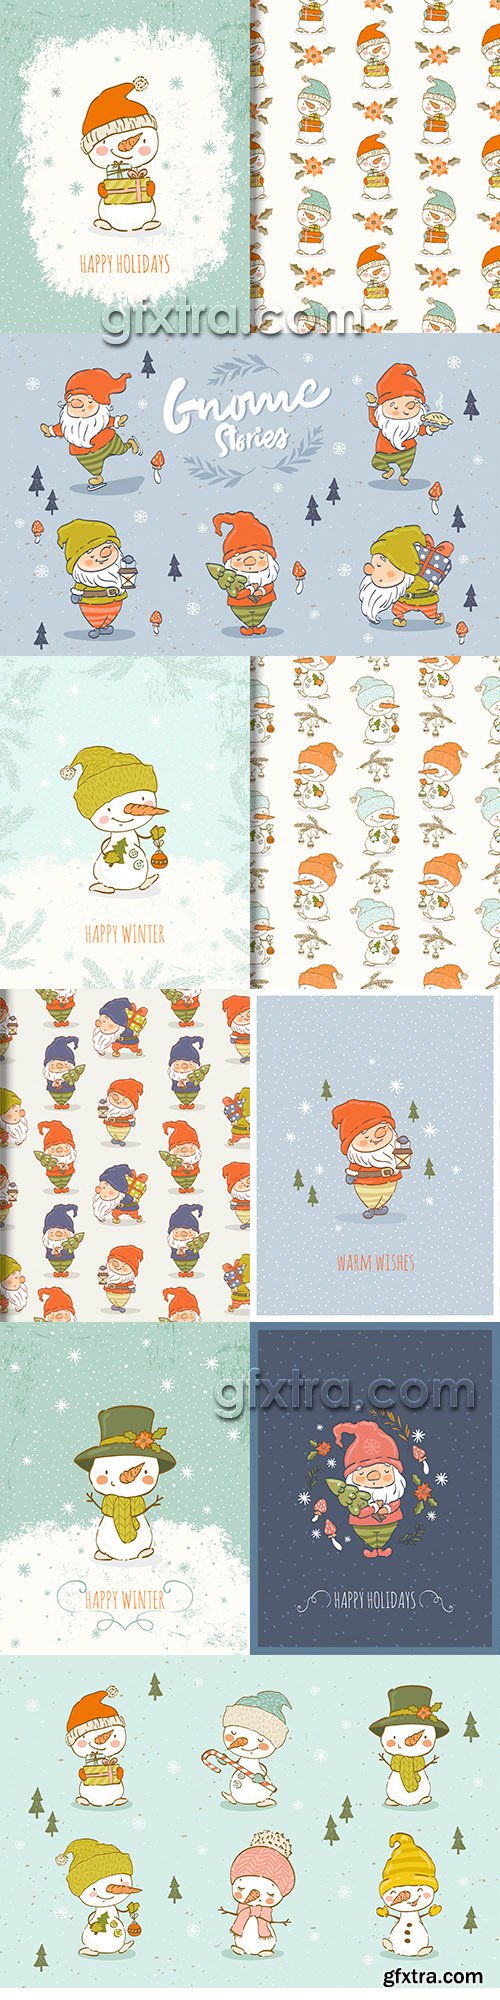 Funny snowman and New Year’s Santa watercolor illustrations